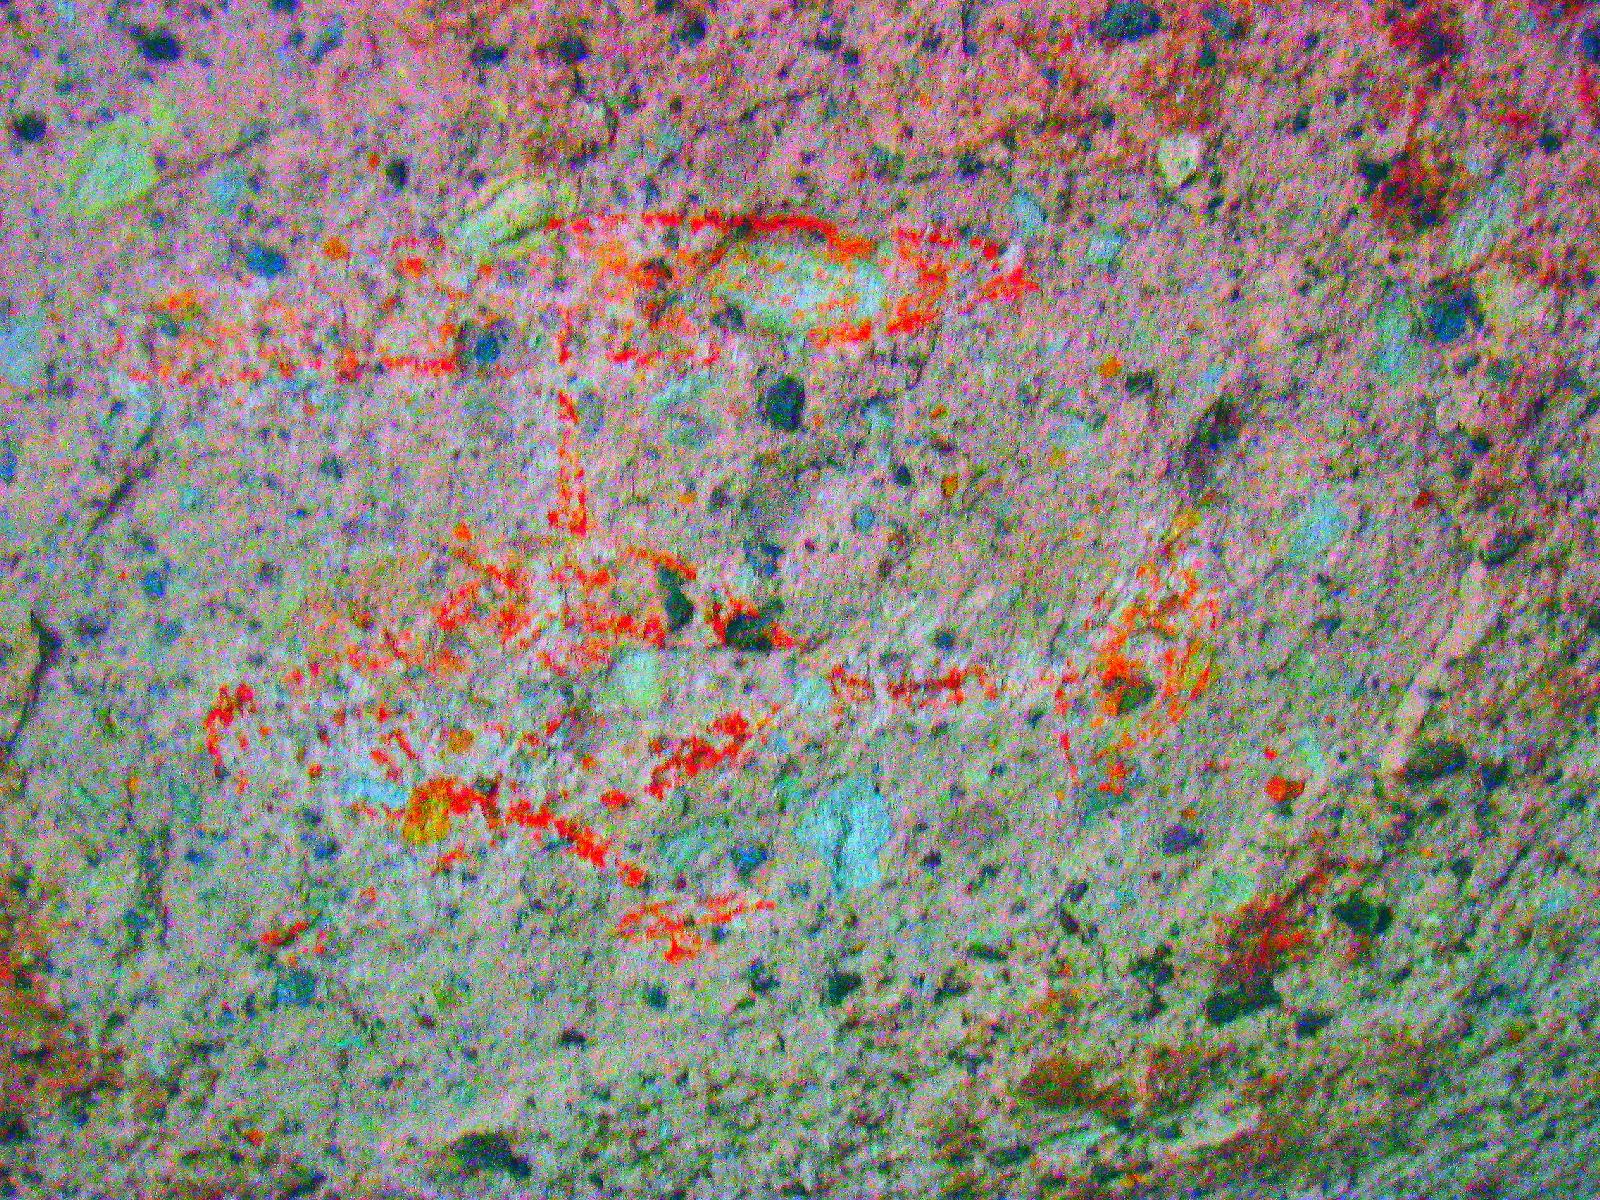 Colorspace YCbCr. Its a helicopter. I would never condone graffitti, but it is amusing to anyone who knows the story of Earl Stanley Gardner's 'discovery' of Cueva Pintada. In fact I have learned that this graffiti was probably made by the Gardner Expedition in the 1960's and was erased by a concerned rock art specialist in 1969. Last slide.